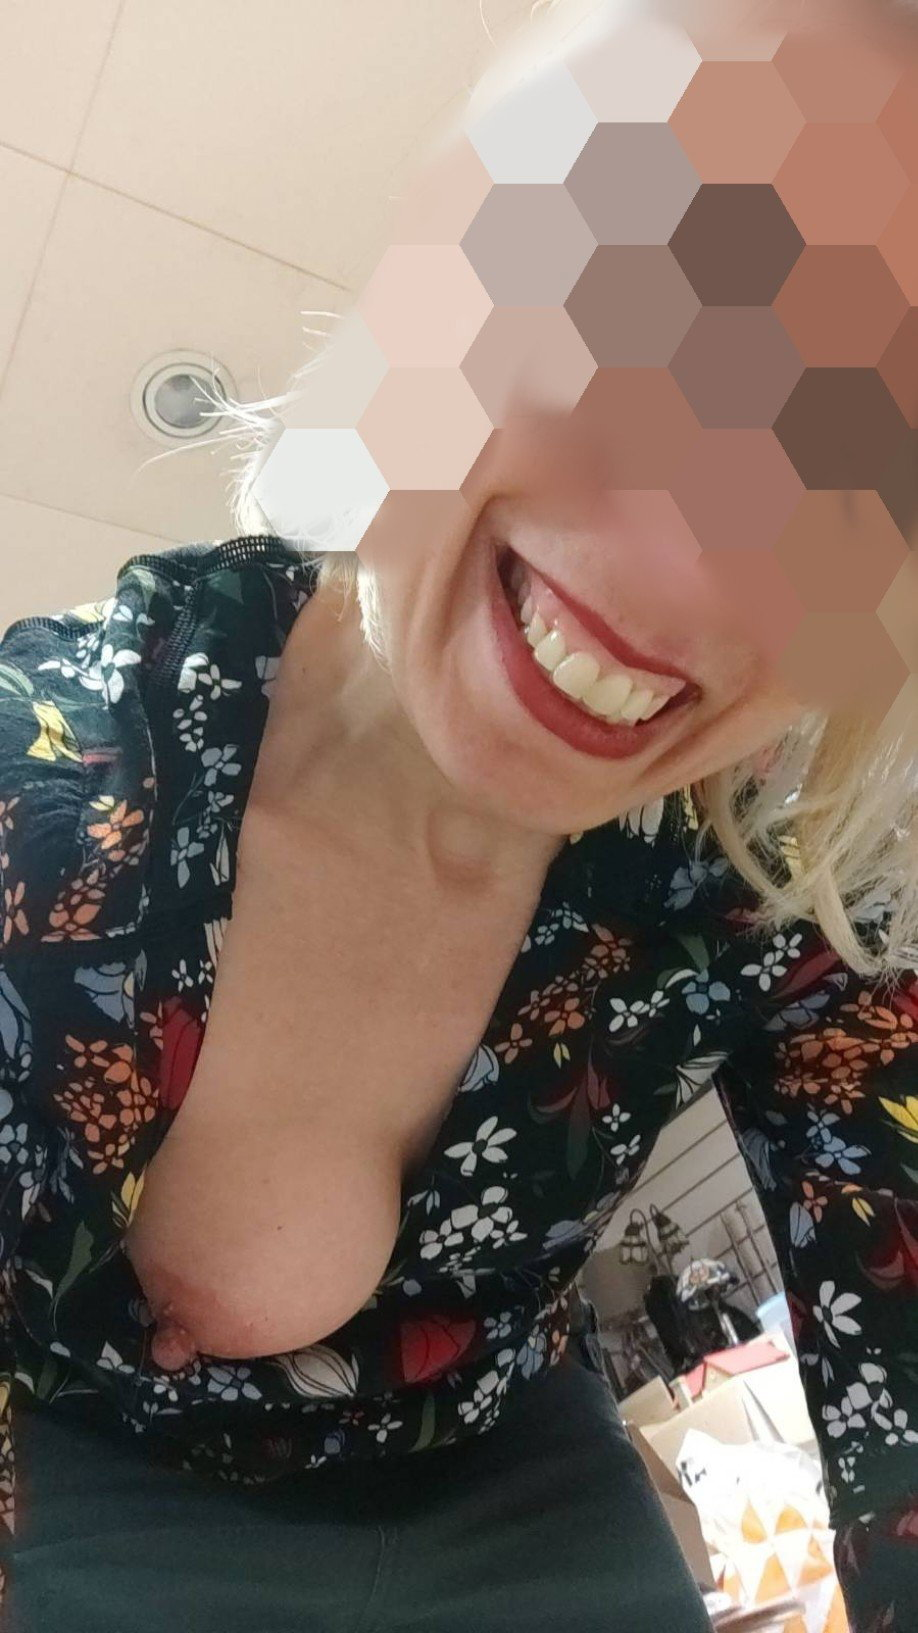 Photo by Joker_and_Harley with the username @Joker-and-Harley, who is a verified user,  May 9, 2022 at 2:35 PM. The post is about the topic Nude working girls and the text says 'Share,Like,Flame and comment... and more Cock/Cumtribute very welcome ... plenty of choice on our gallery....and tag to let us know of course!!'